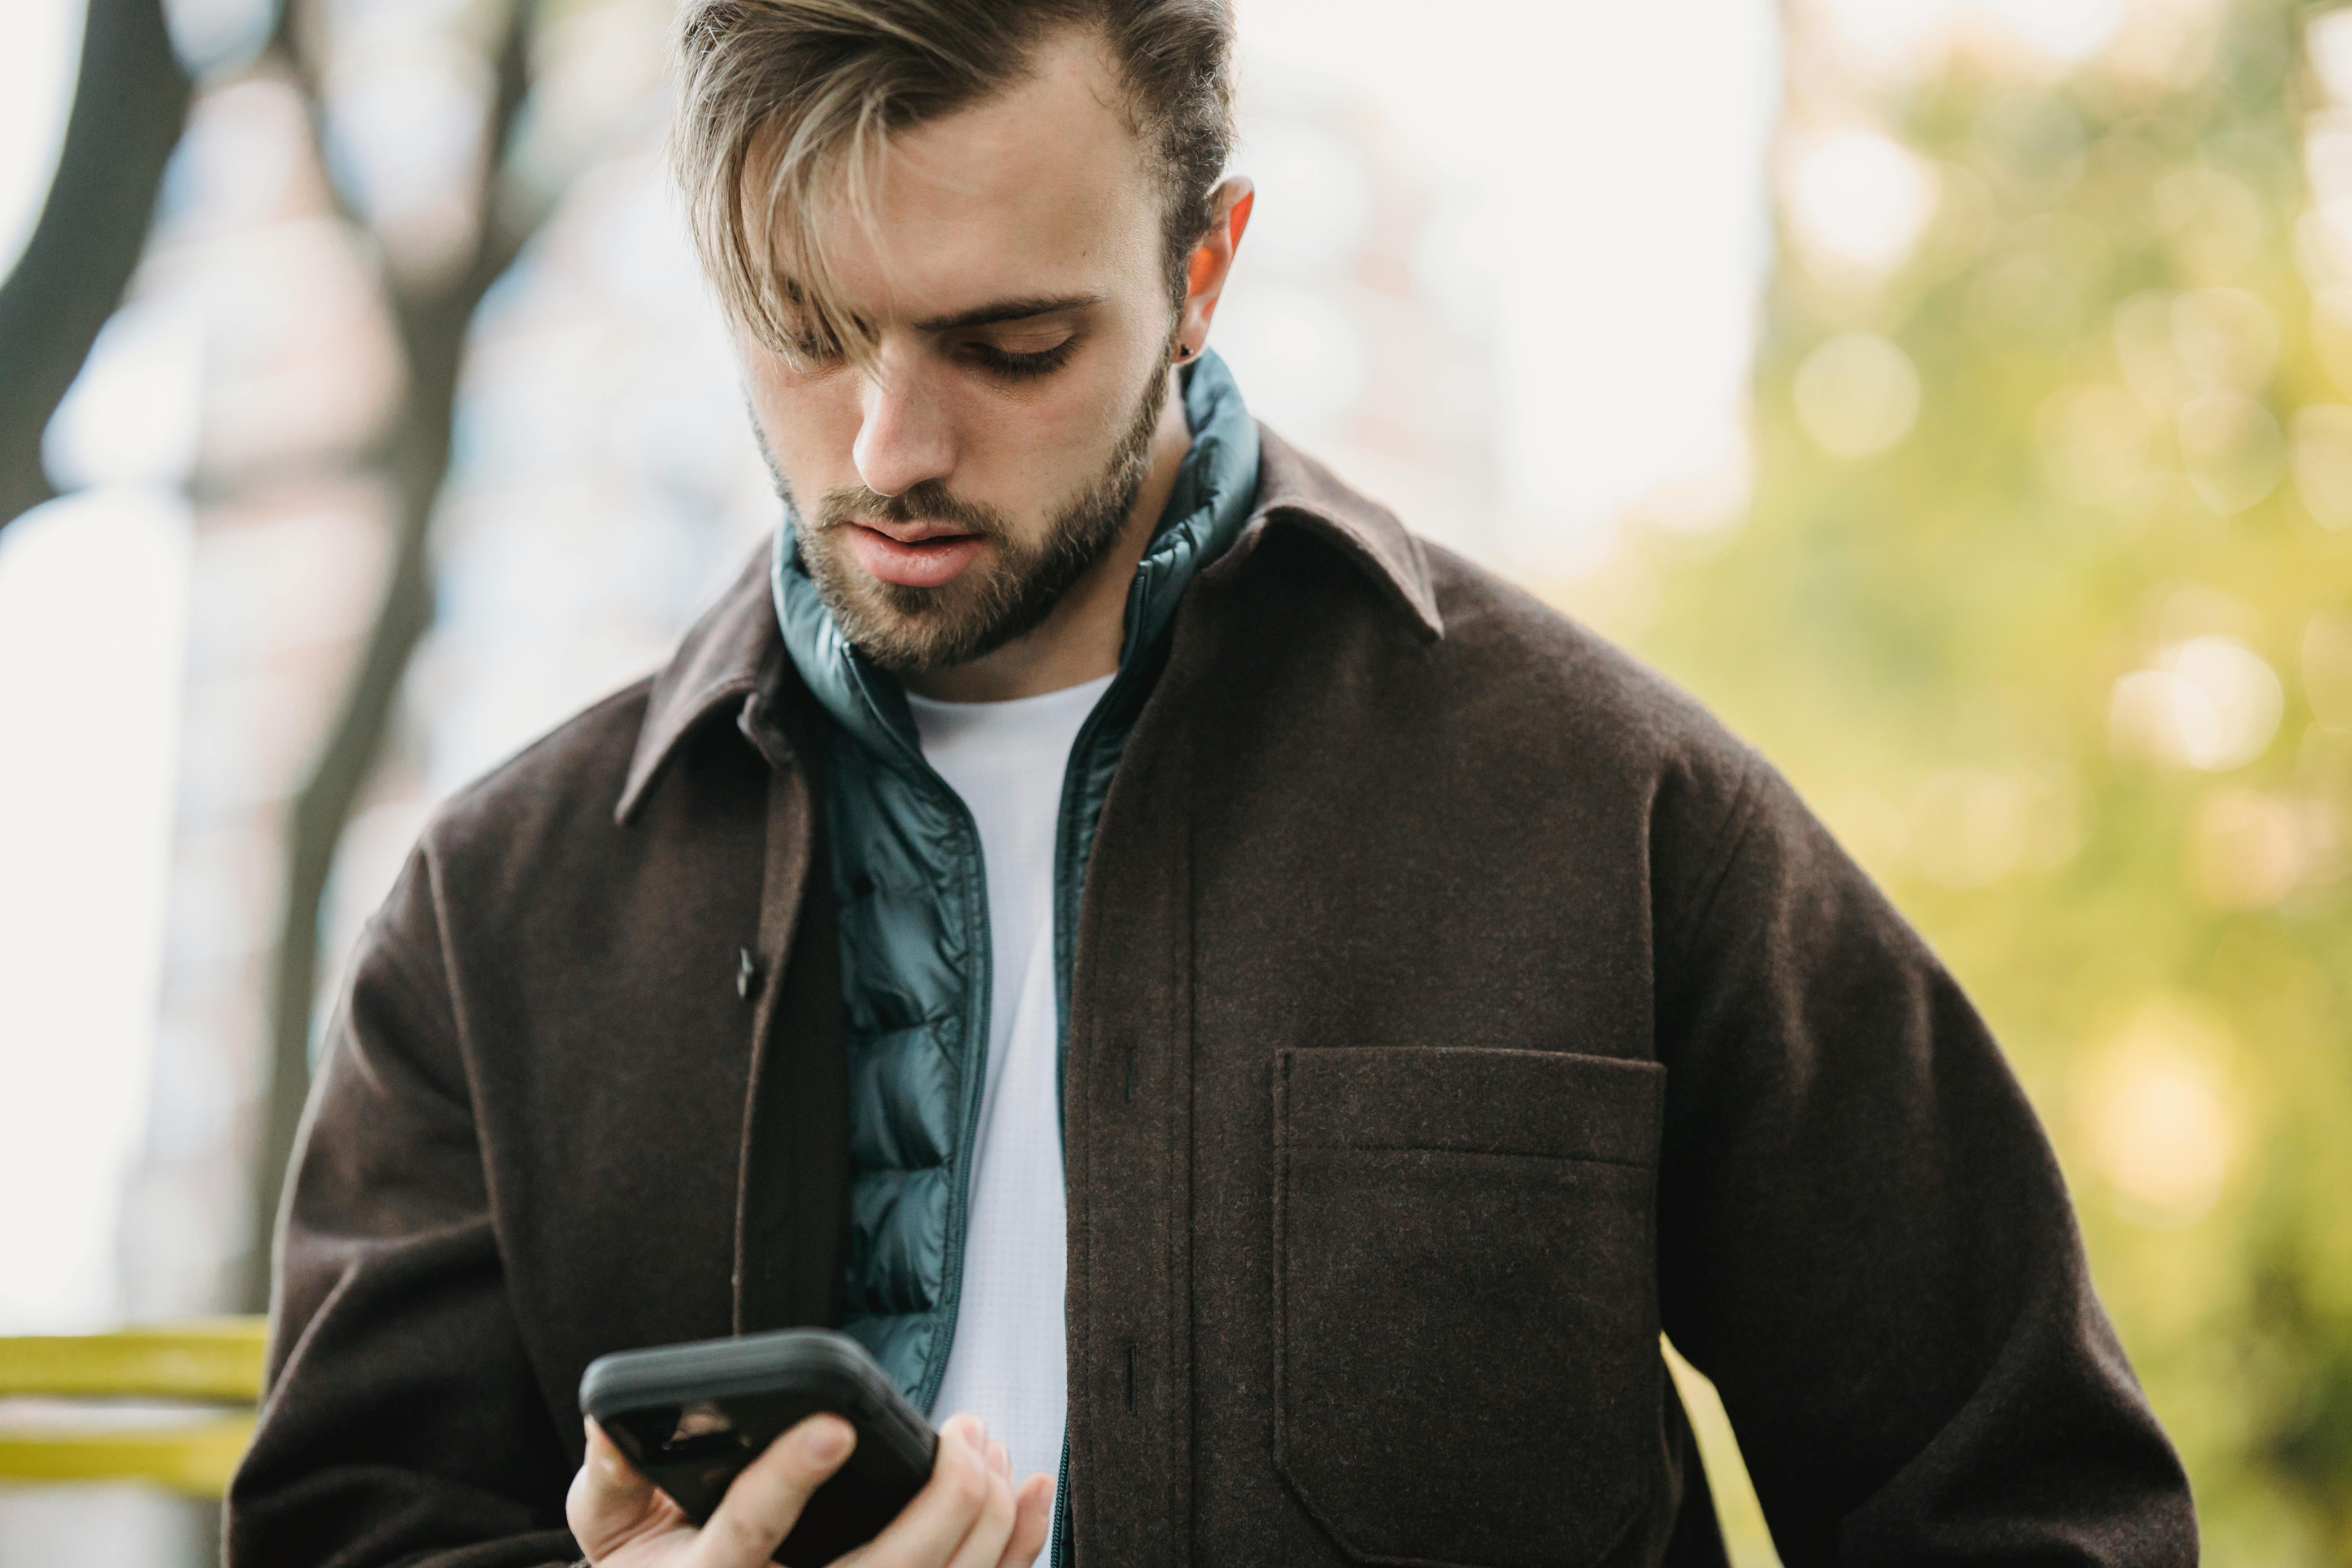 A man on his phone | Source: Pexels